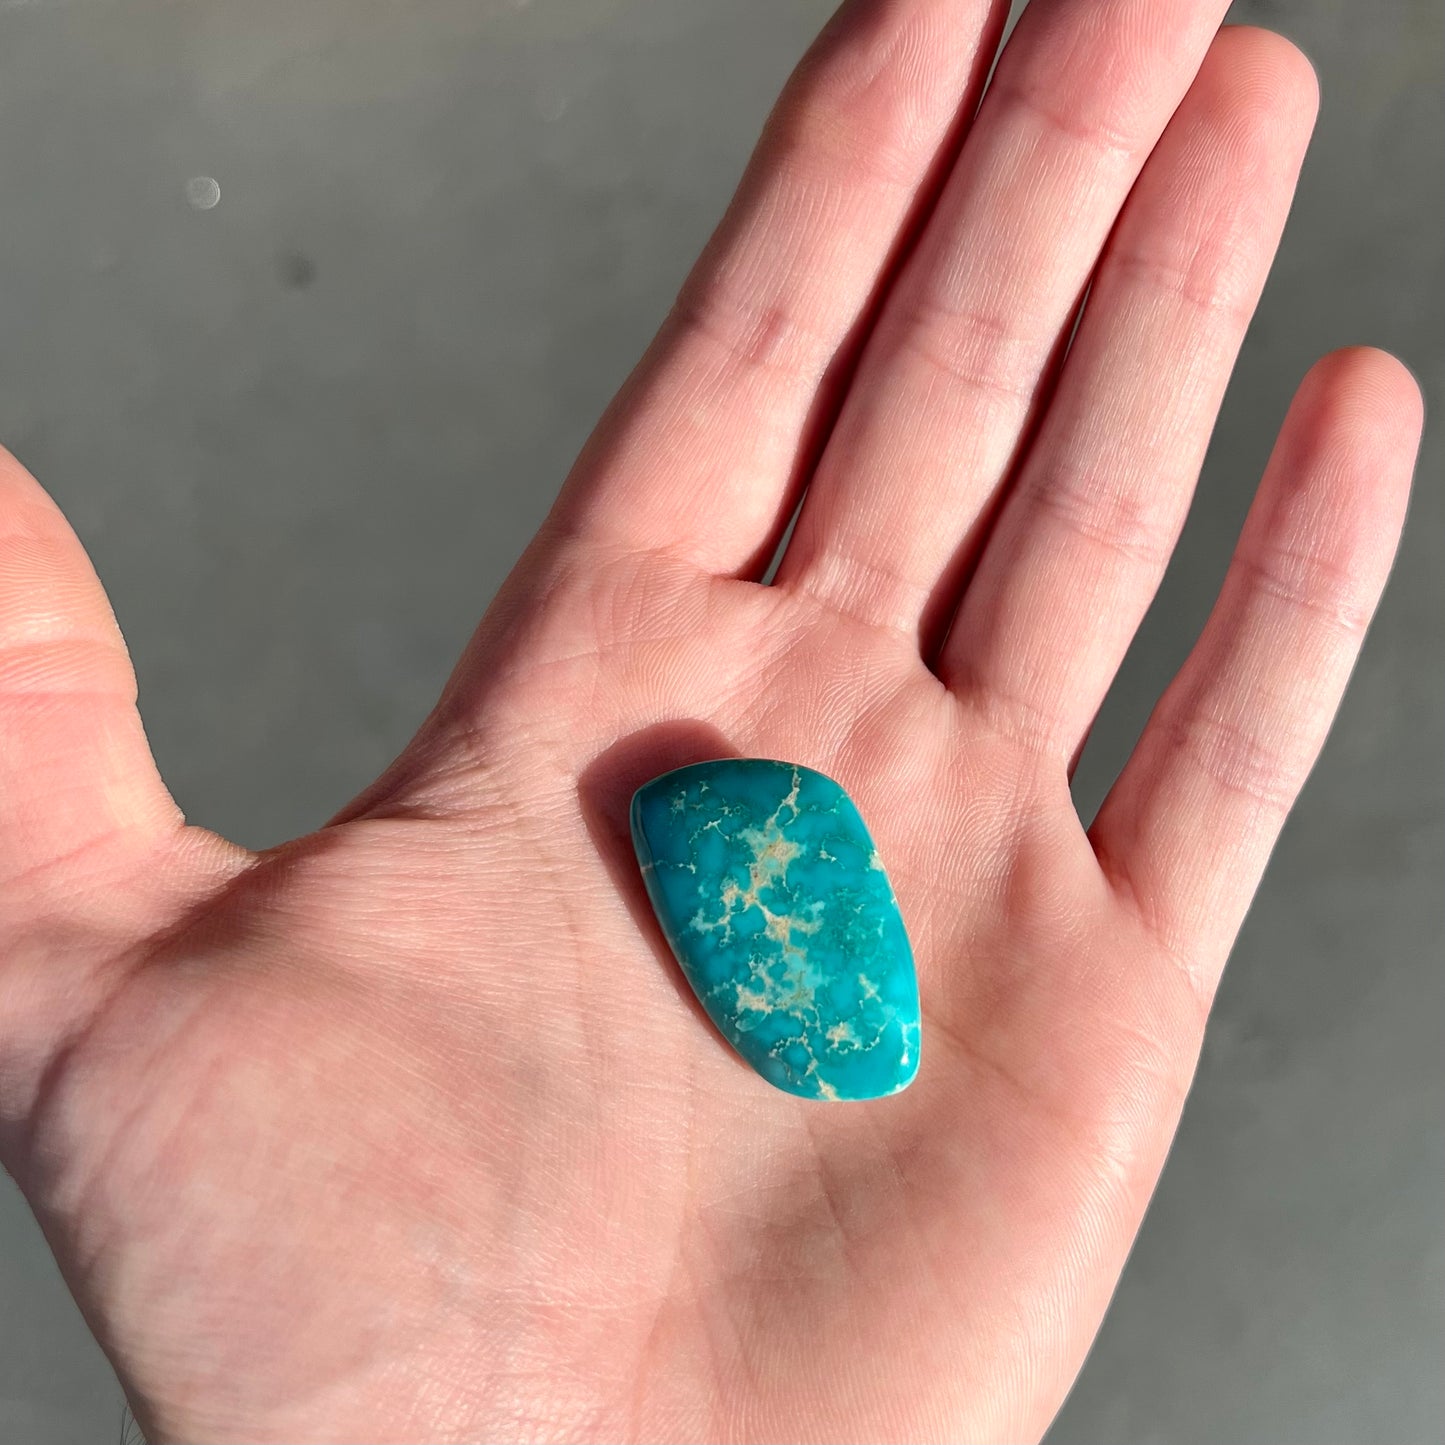 Loose blue turquoise stone from Fox Turquoise Mine in Lander County, Nevada.